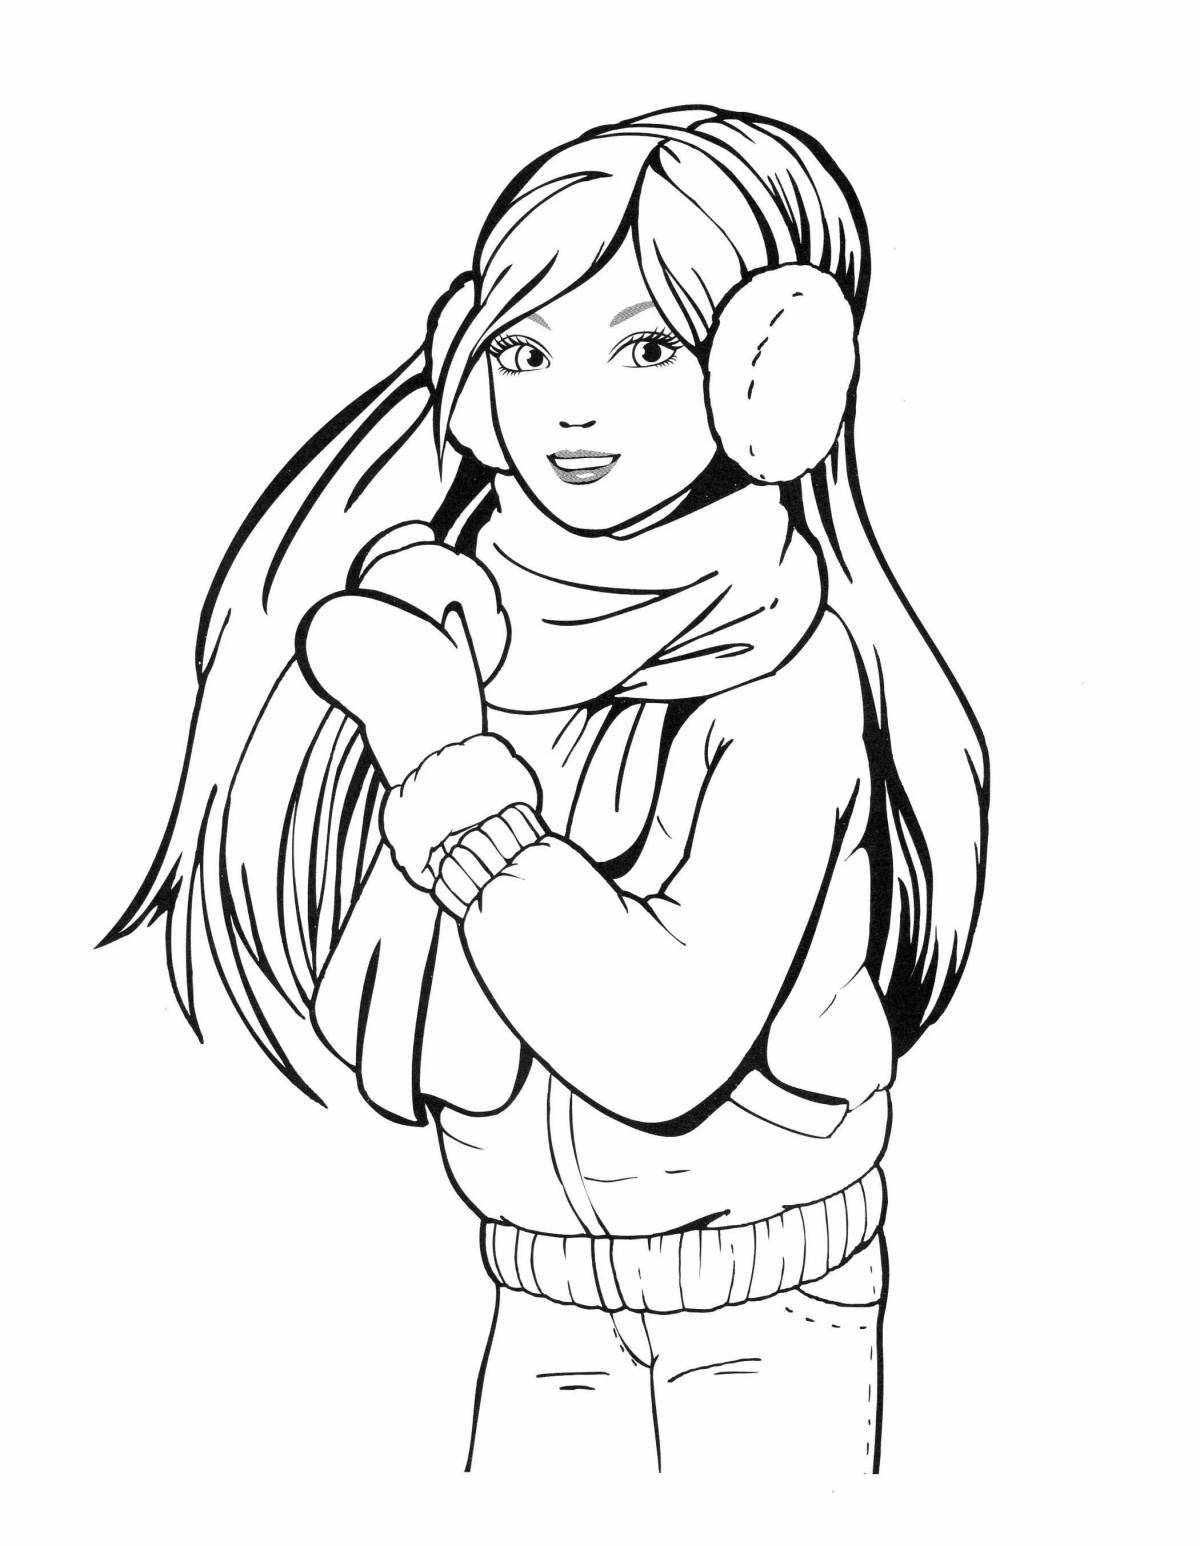 Exciting coloring girl with headphones